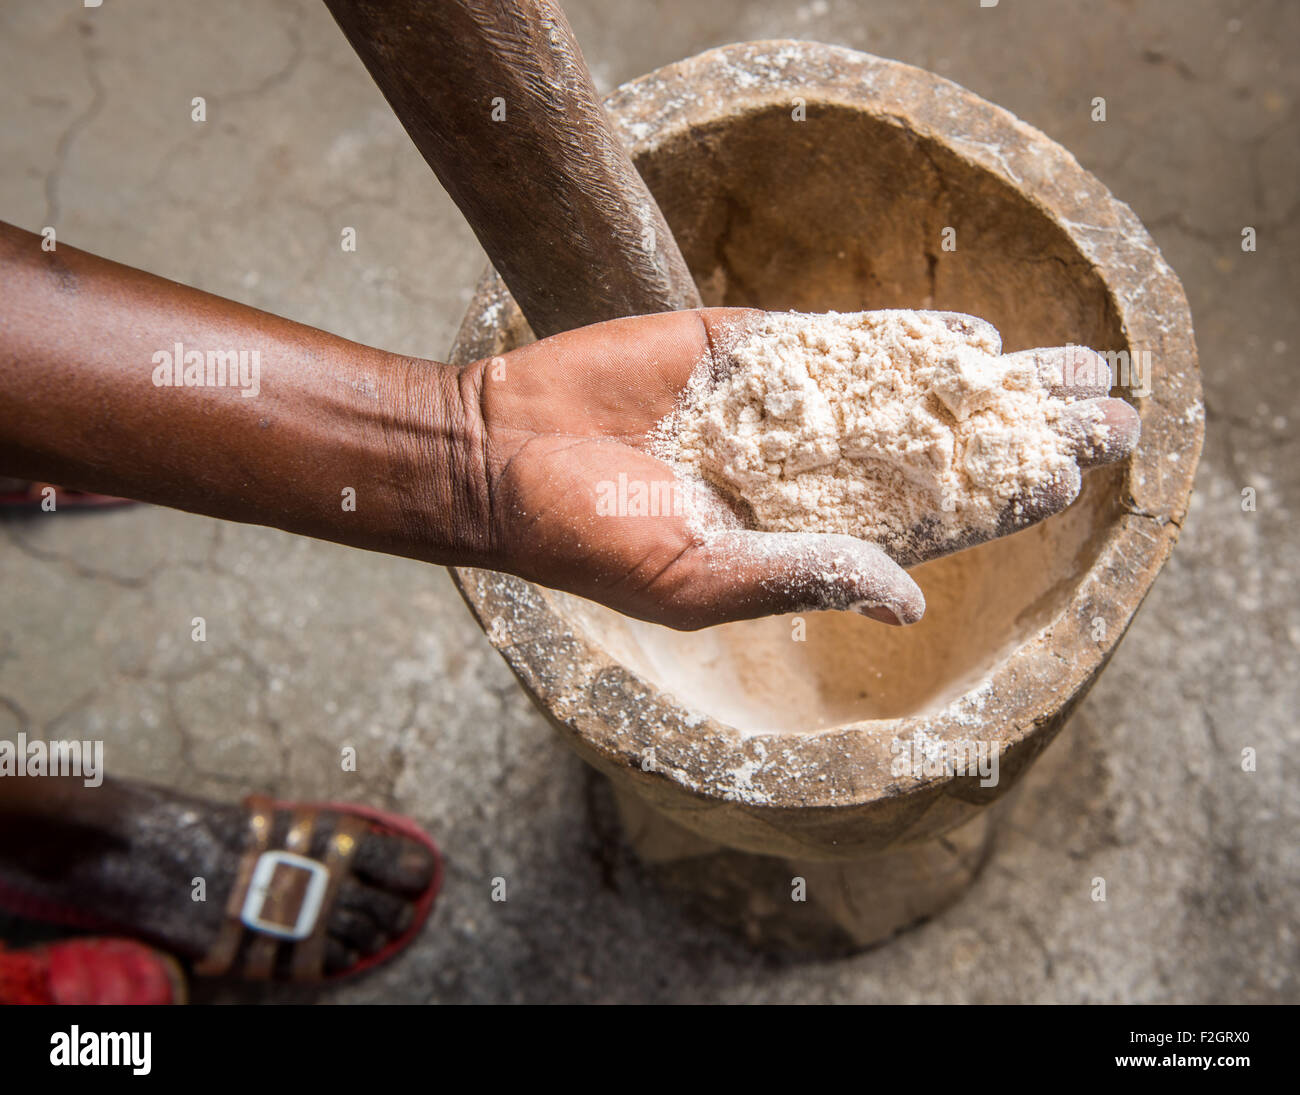 Woman's hand showing sorghum meal after pounding with a mortar and pestle in Sexaxa Village in Botswana, Africa Stock Photo